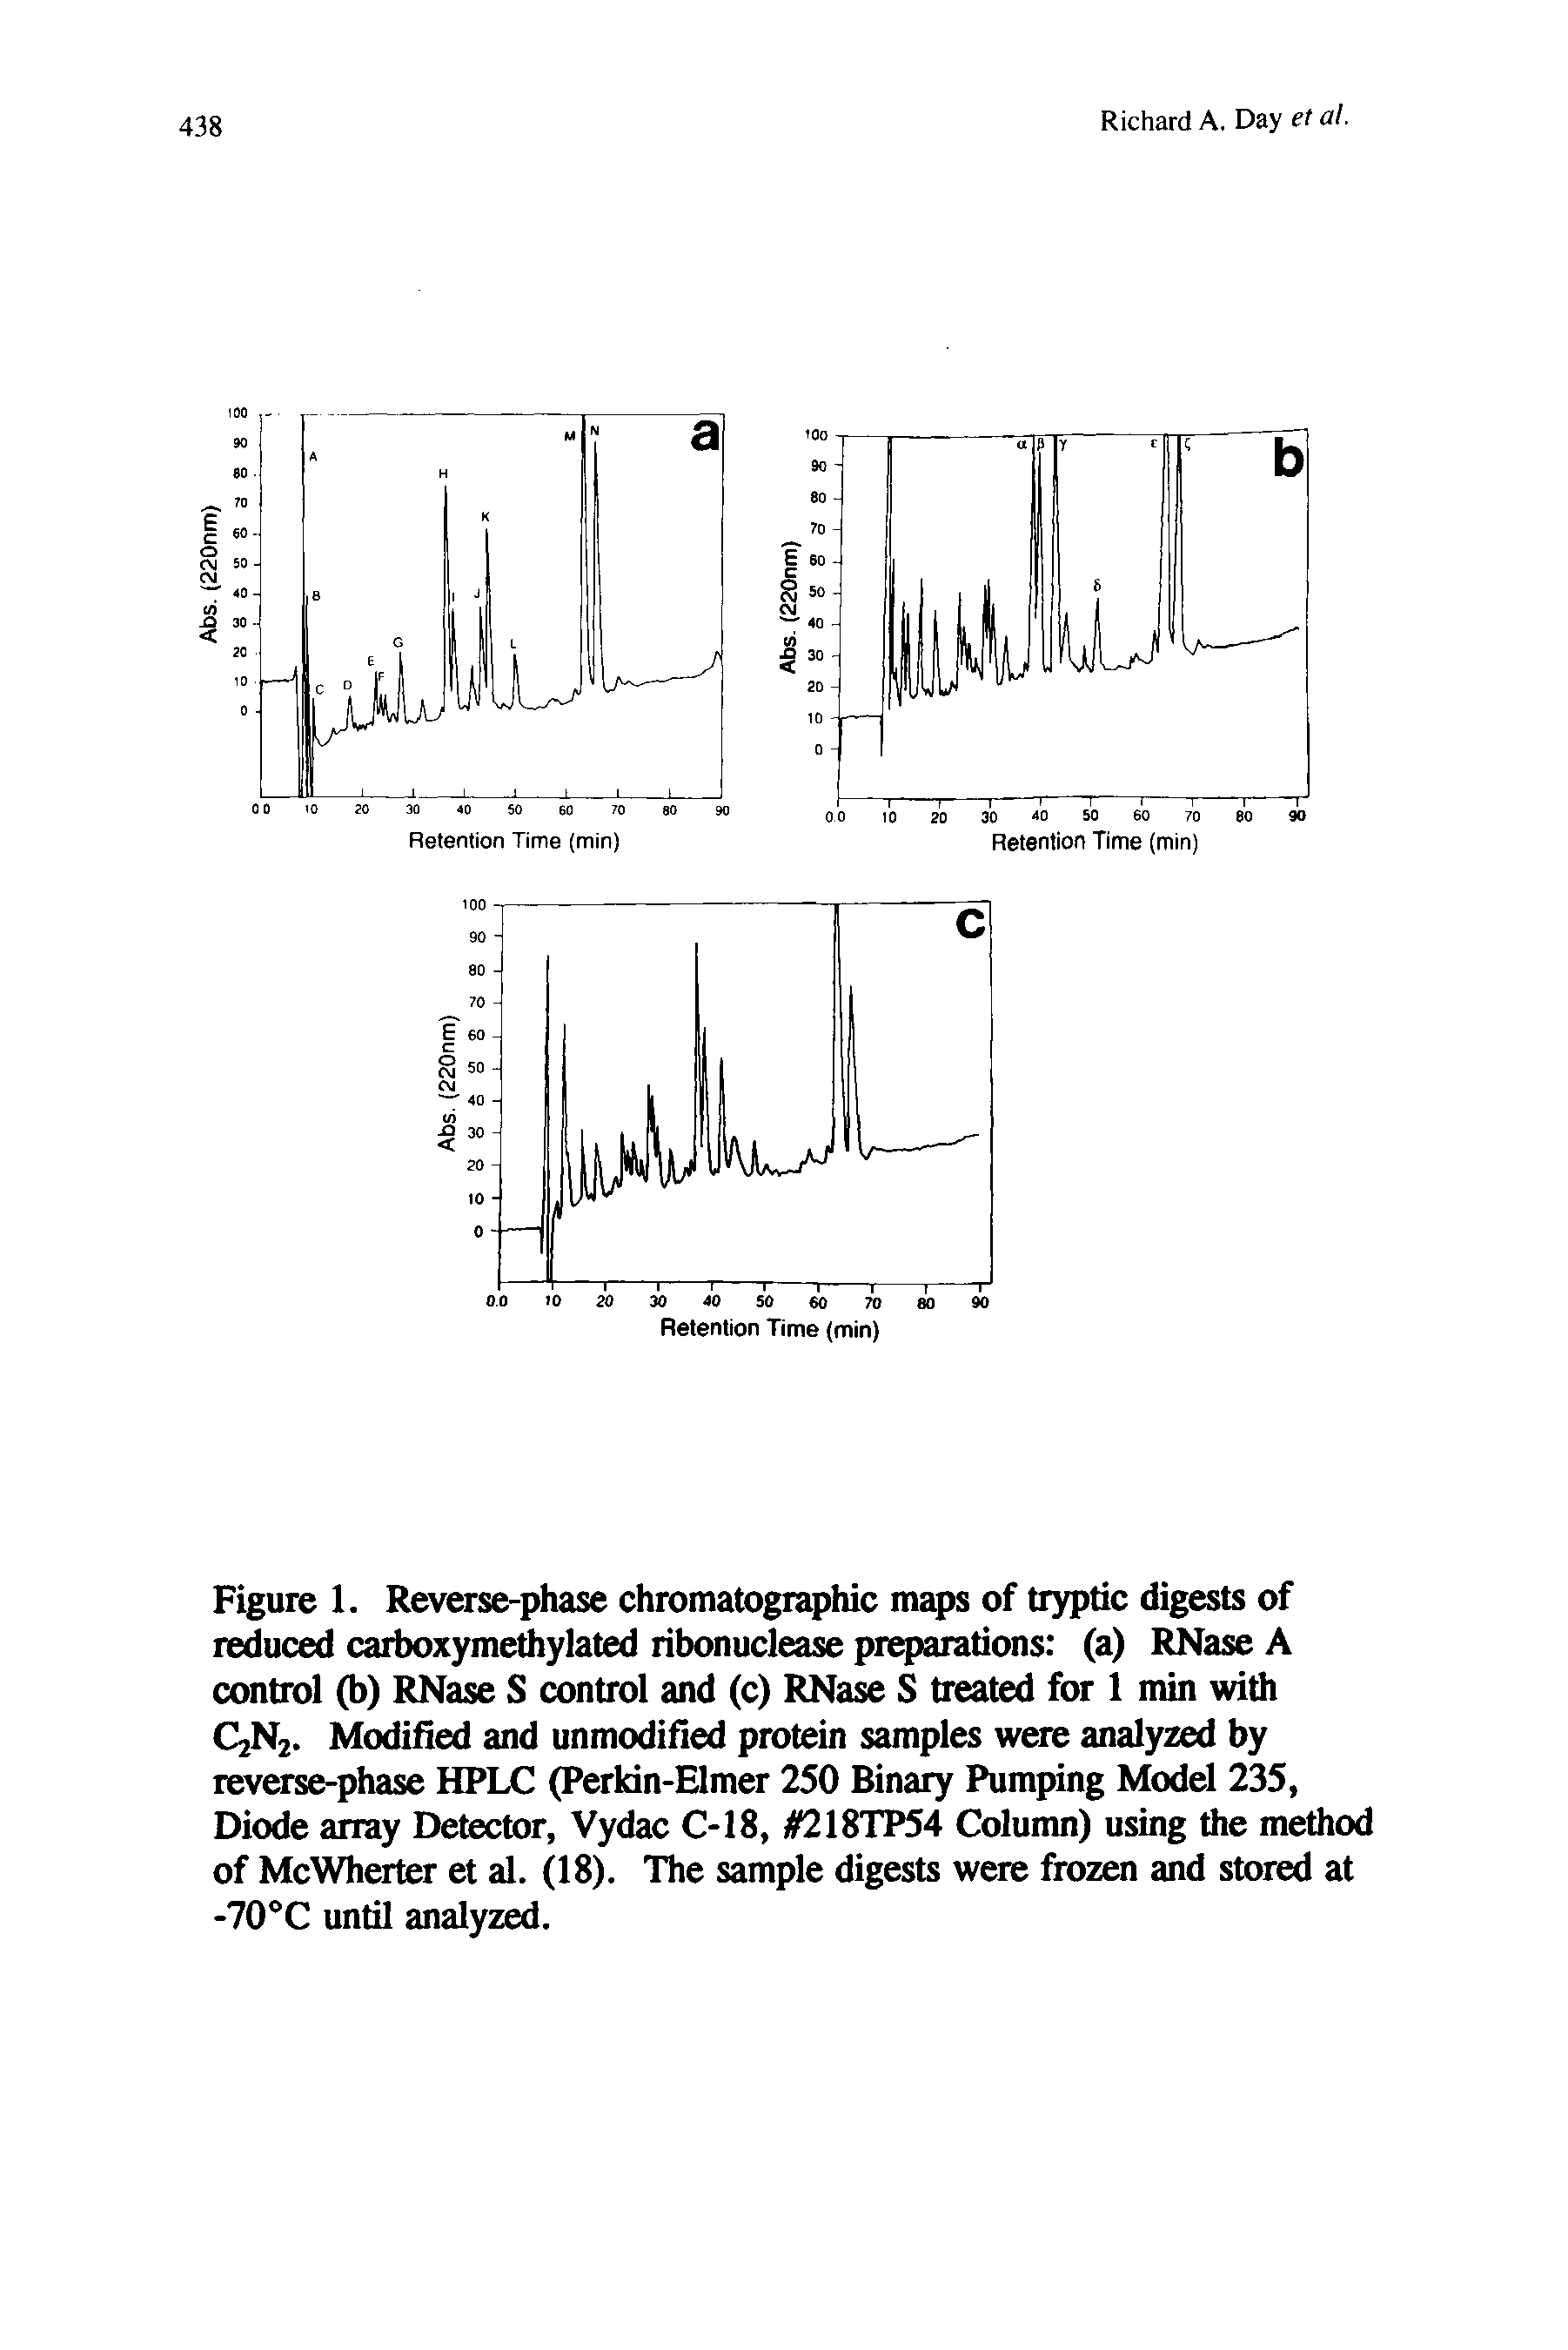 Figure 1. Reverse-phase chromatographic maps of tryptic digests of reduced caiboxymethylated ribonuclease preparations (a) RNase A control (b) RNase S control and (c) RNase S treated for 1 min with C2N2. Modified and unmodified protein samples were analyzed by reverse-phase HPLC (Perkin-Elmer 250 Binary Pumping Model 235, Diode array Detector, Vydac C-18, 18TP54 Column) using the method of McWherter et al. (18). The sample digests were frozen and stored at -70°C until analyzed.